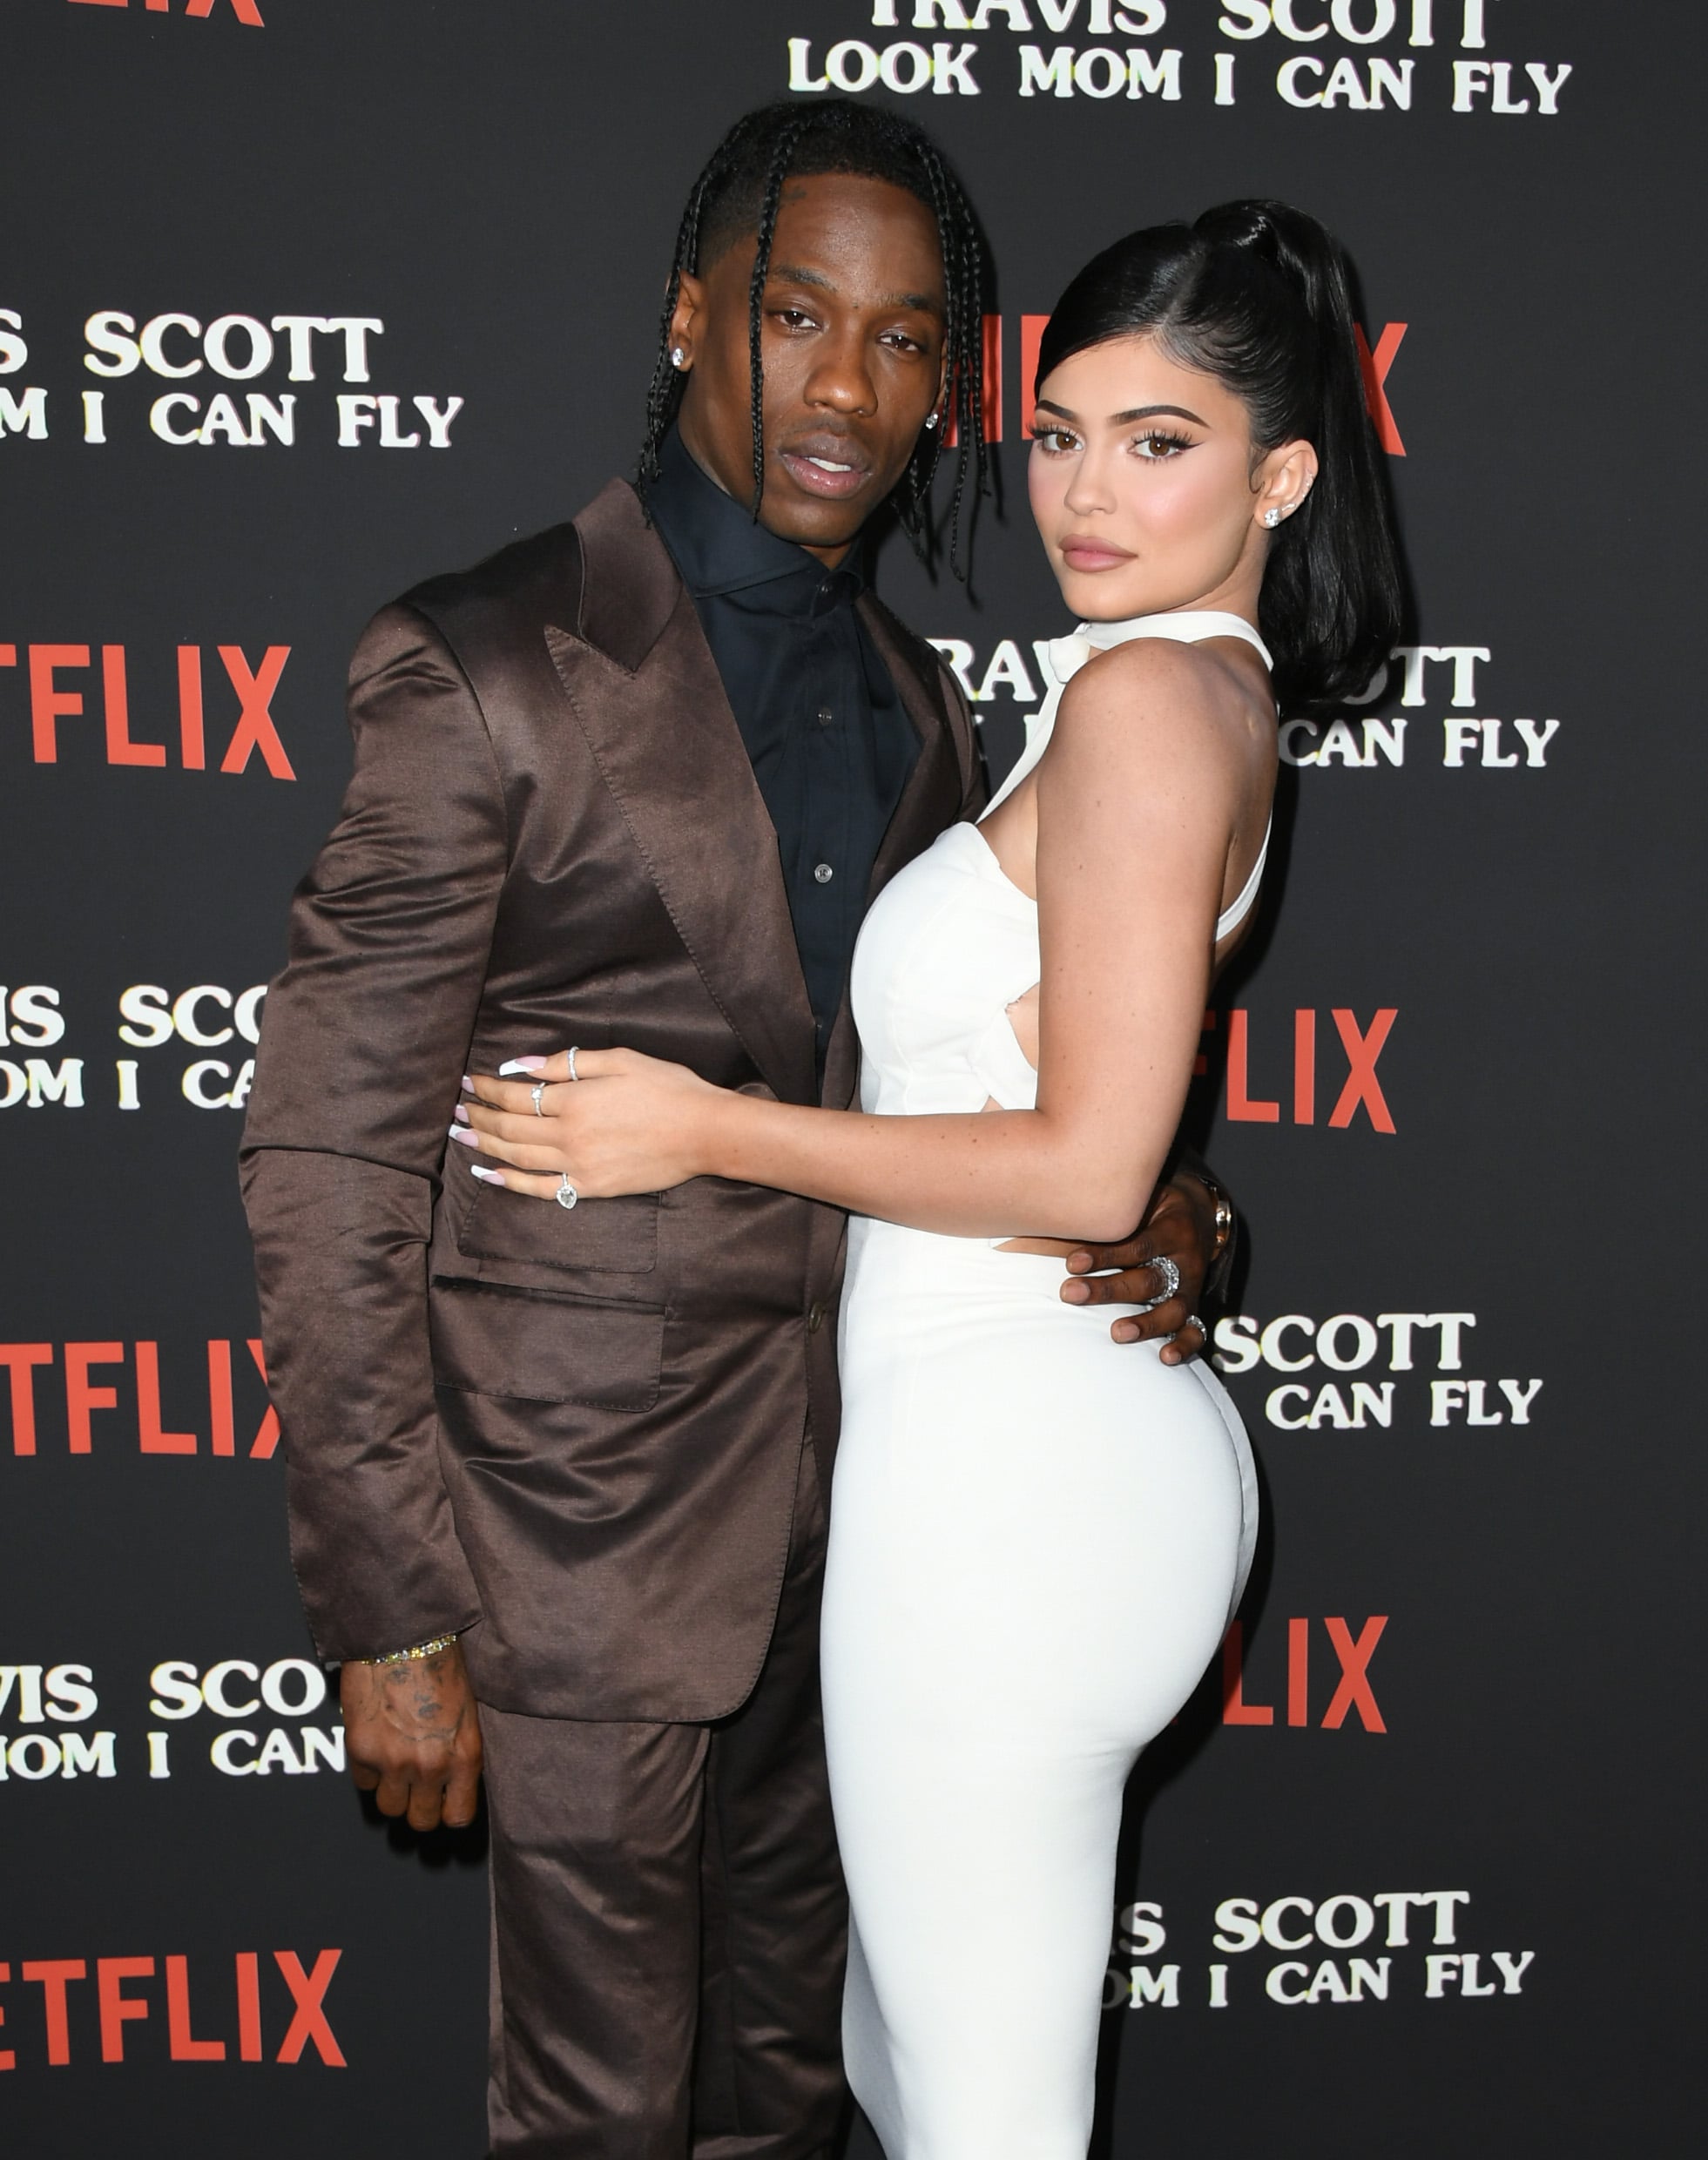 Kylie Jenner Says She’ll “Let [People] Know” When She Changes Her Son’s Name Again